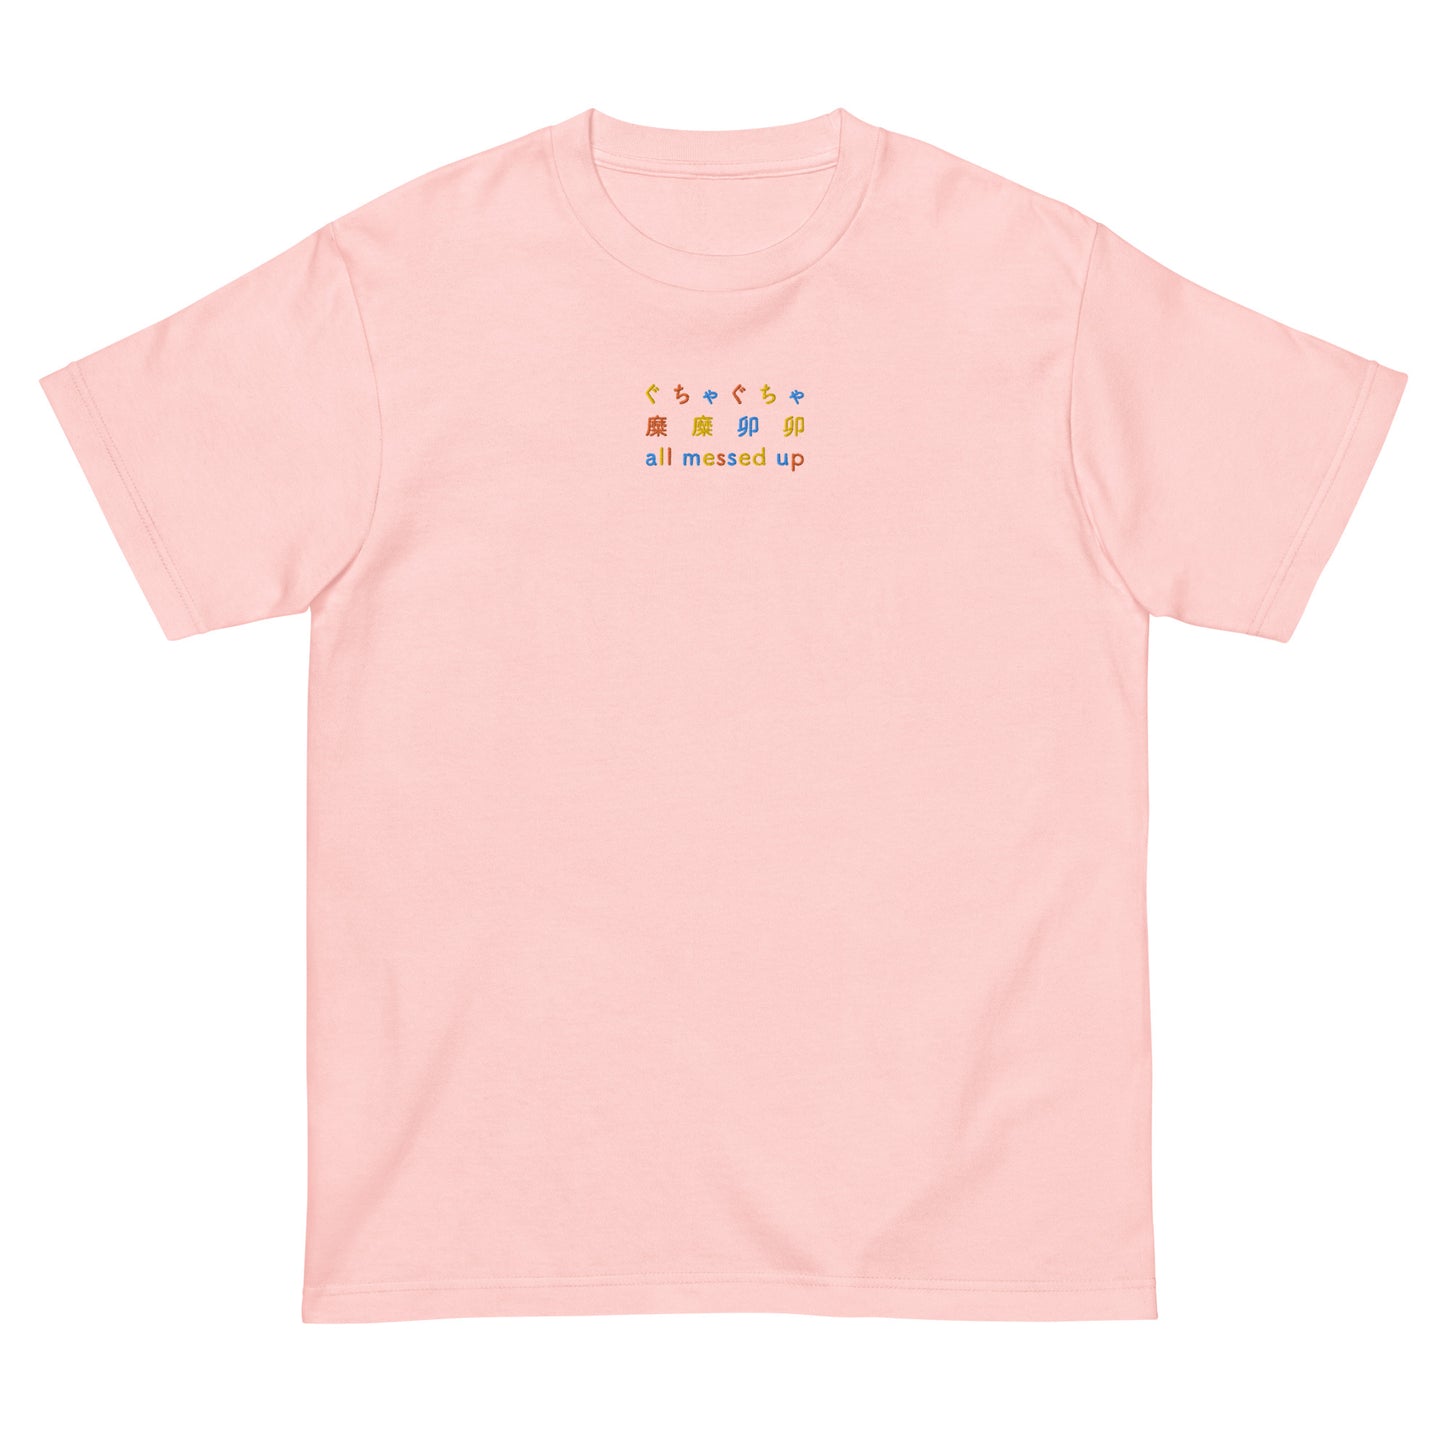 Pink High Quality Tee - Front Design with an Yellow,Orange,Blue Embroidery "All Messed Up" in Japanese,Chinese and English